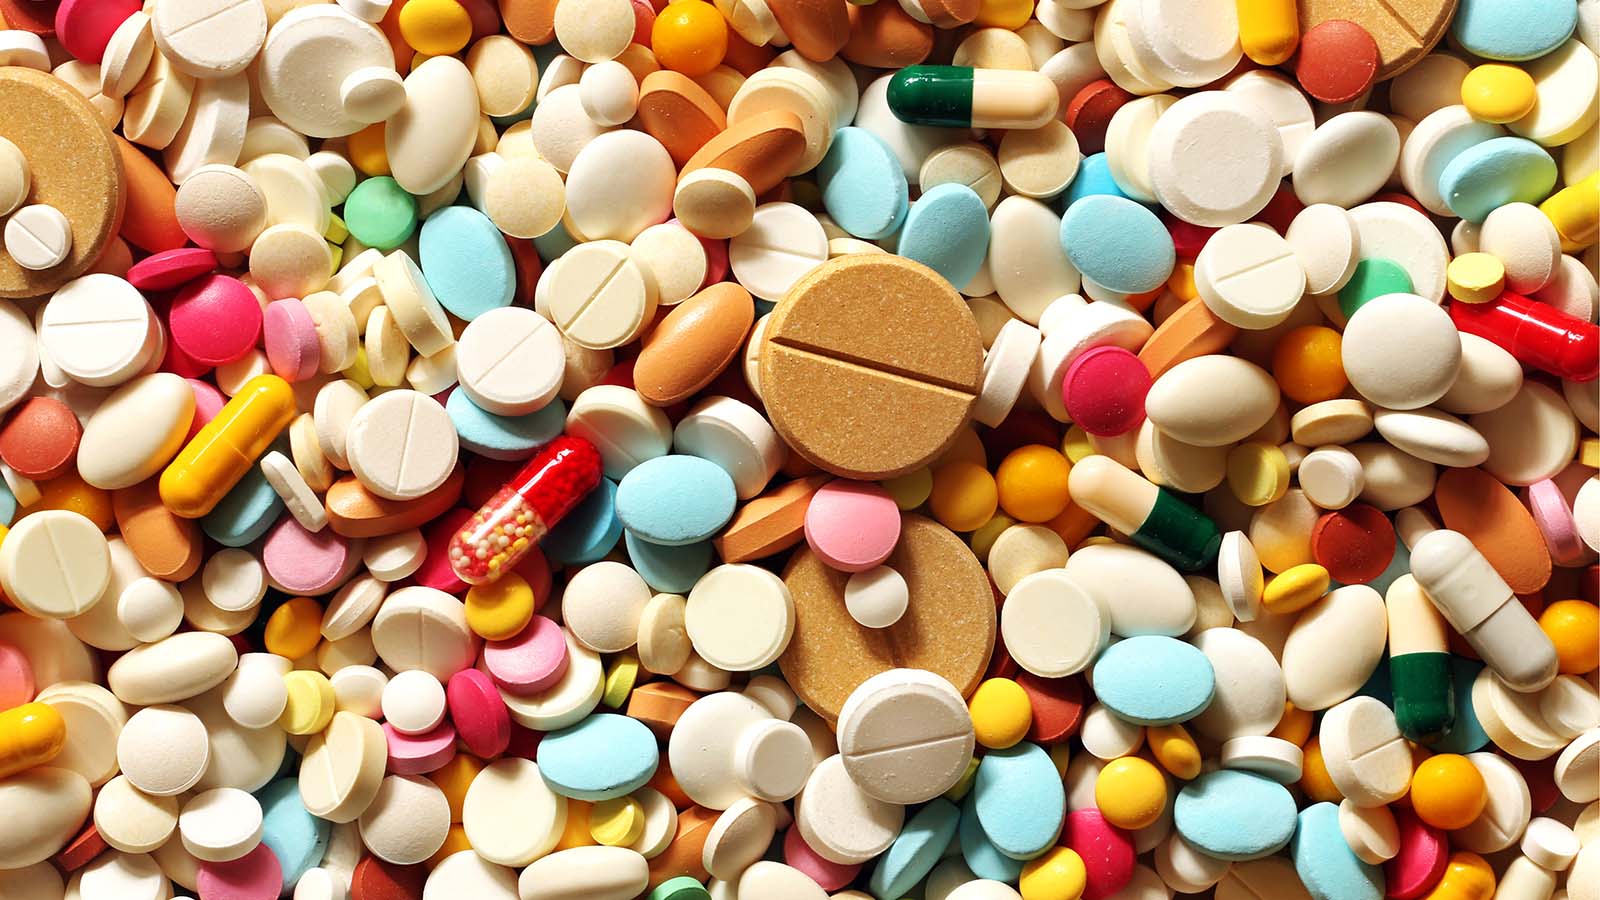 A pile of brightly colored pills in varying sizes and shapes representing DAWN Stock.